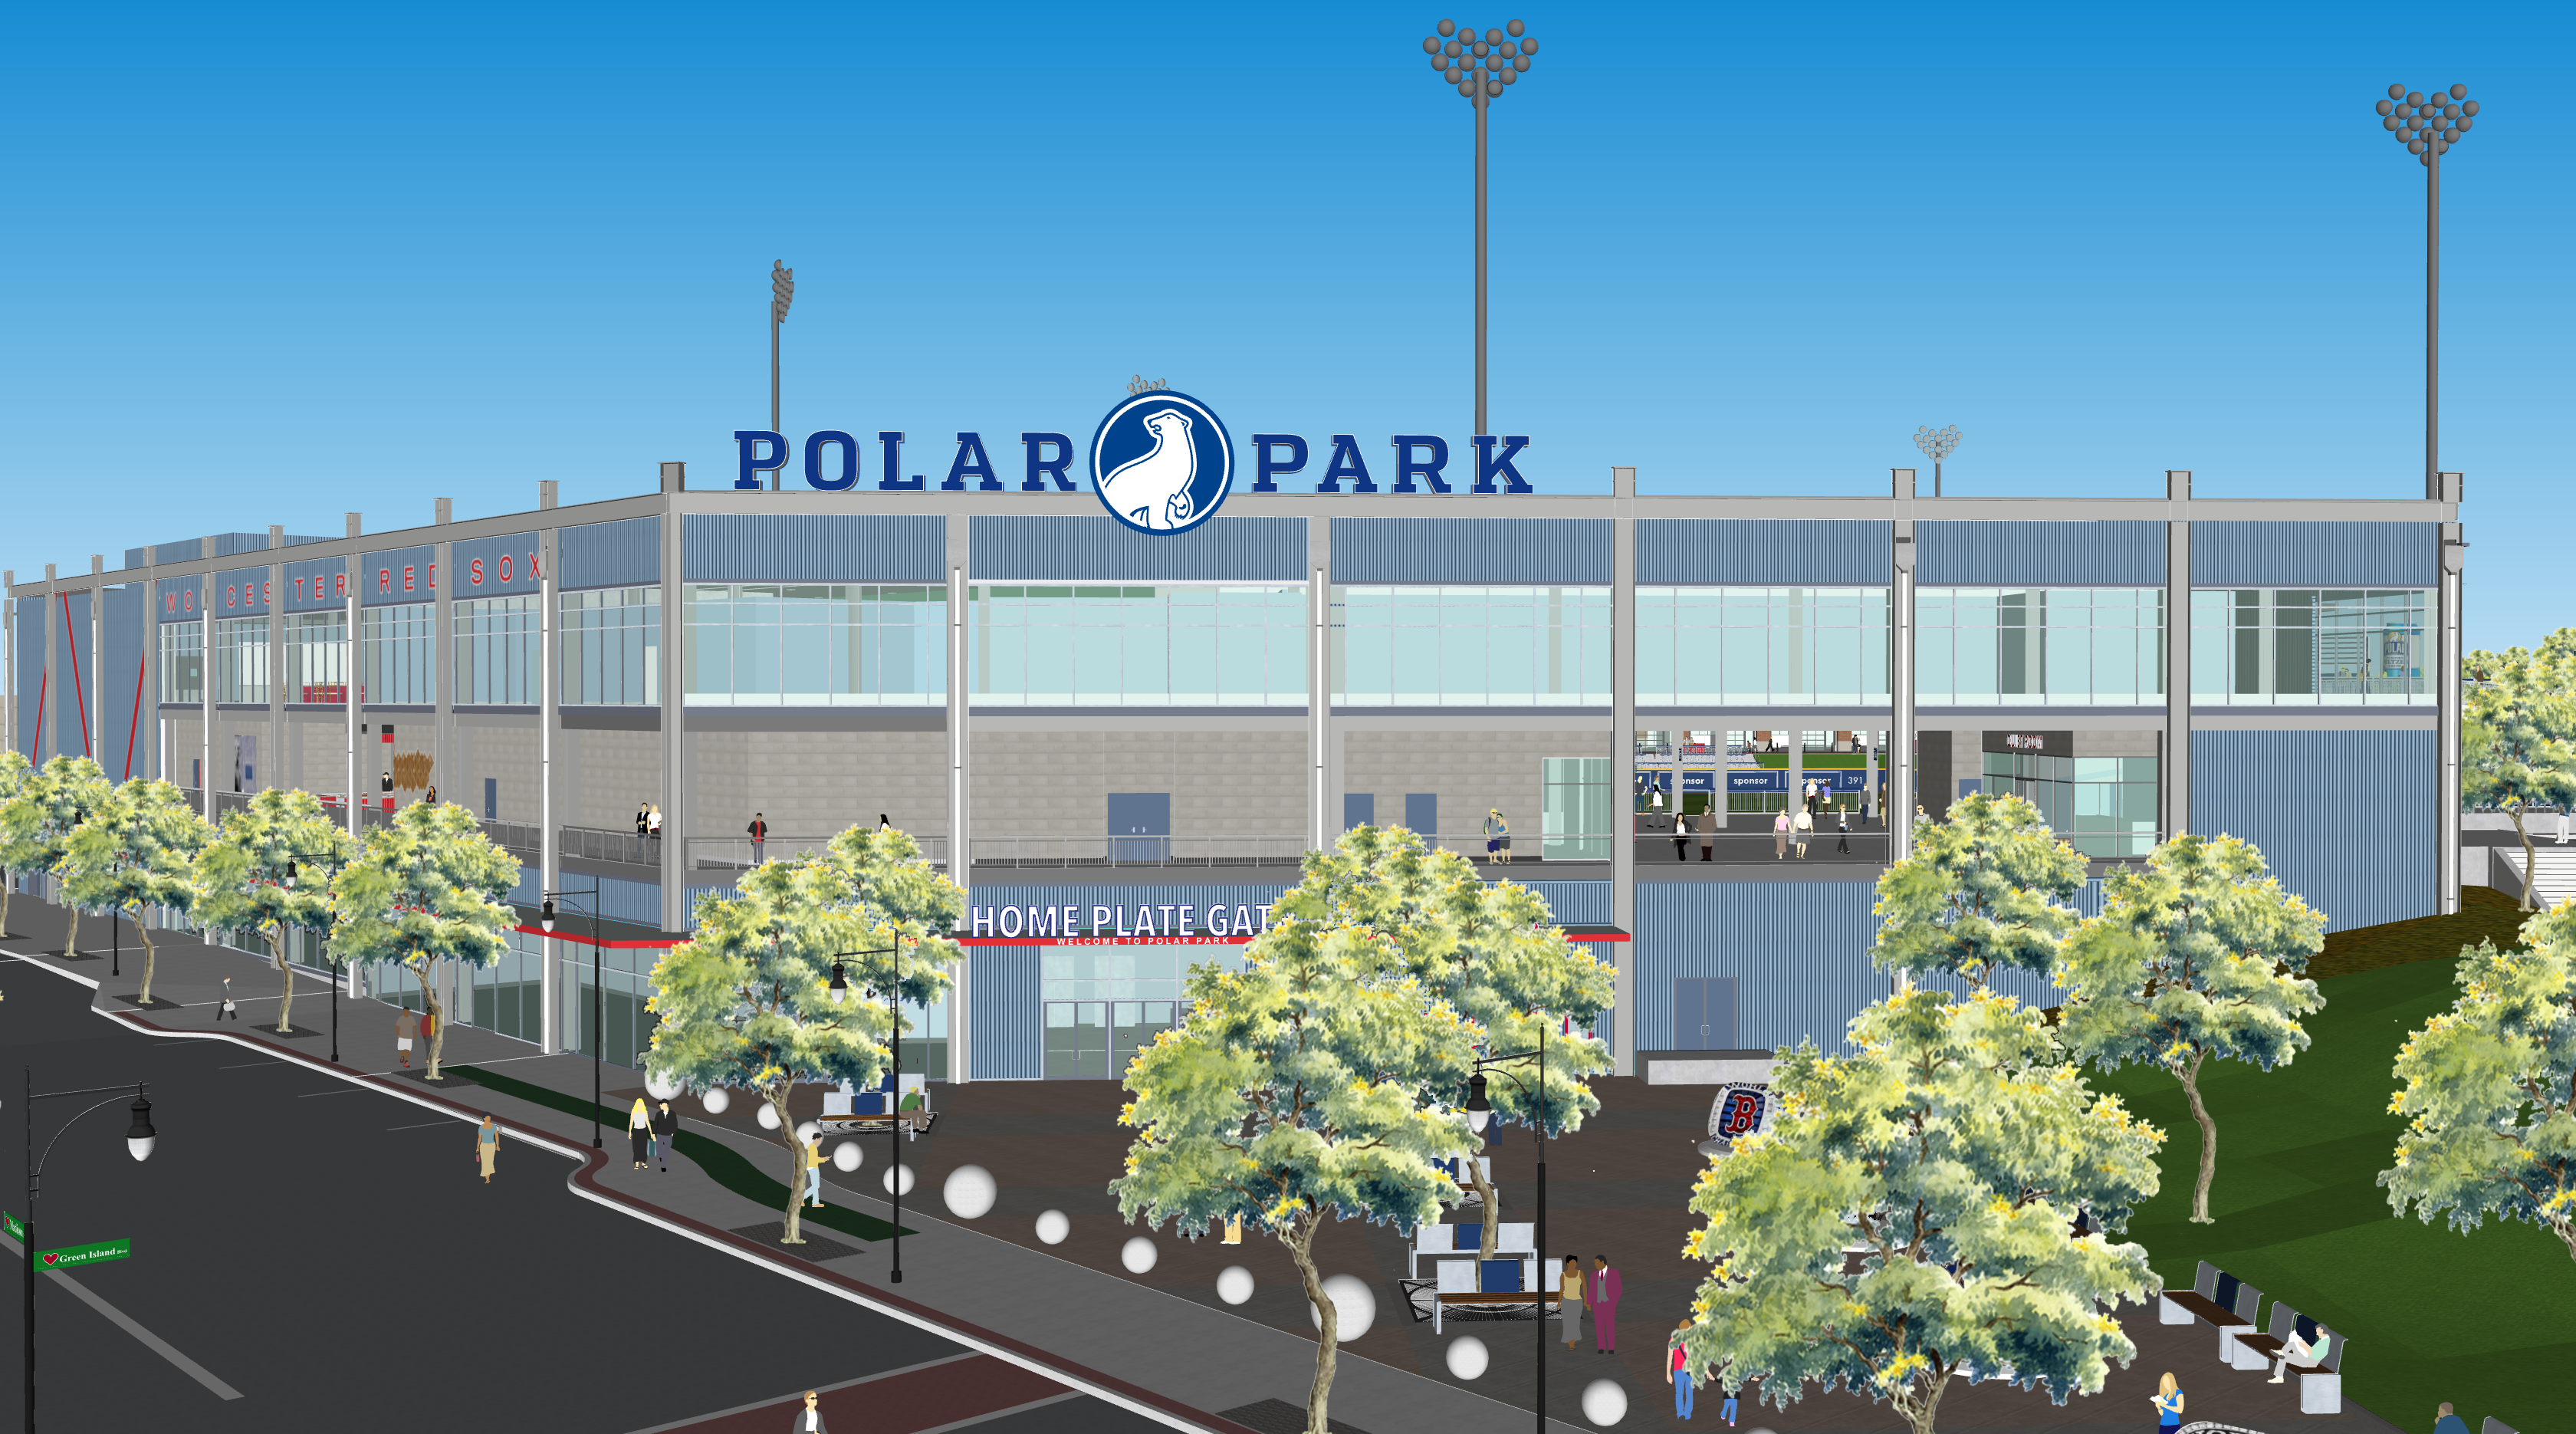 Cost to build Worcester Red Sox stadium, Polar Park, increases by $9.4  million 